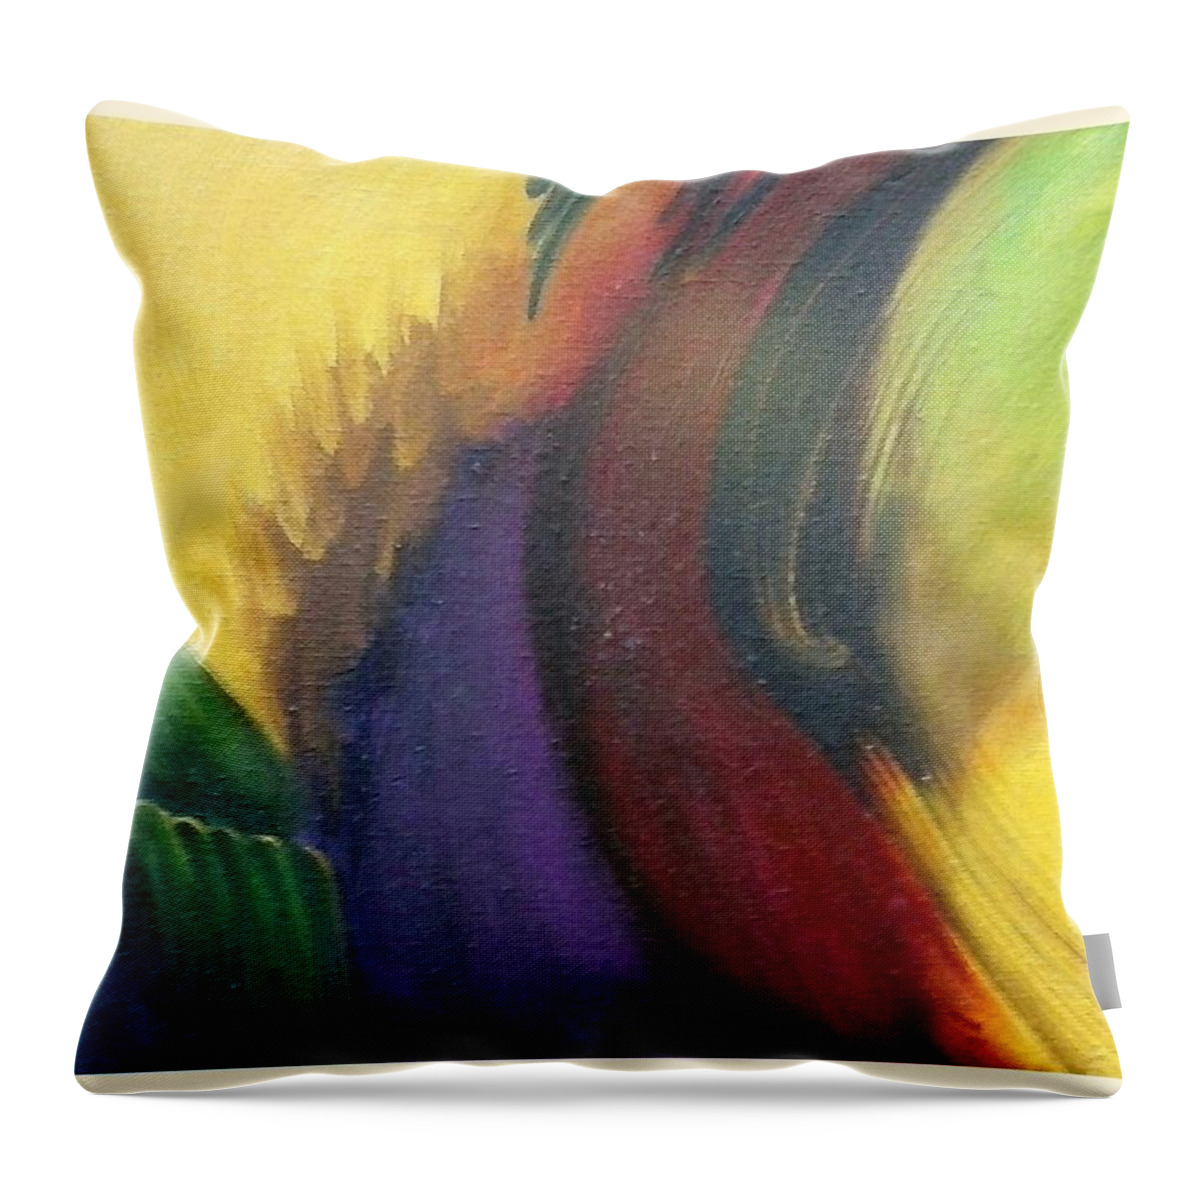 Wall Art Throw Pillow featuring the painting Angel Wings by Cepiatone Fine Art Callie E Austin